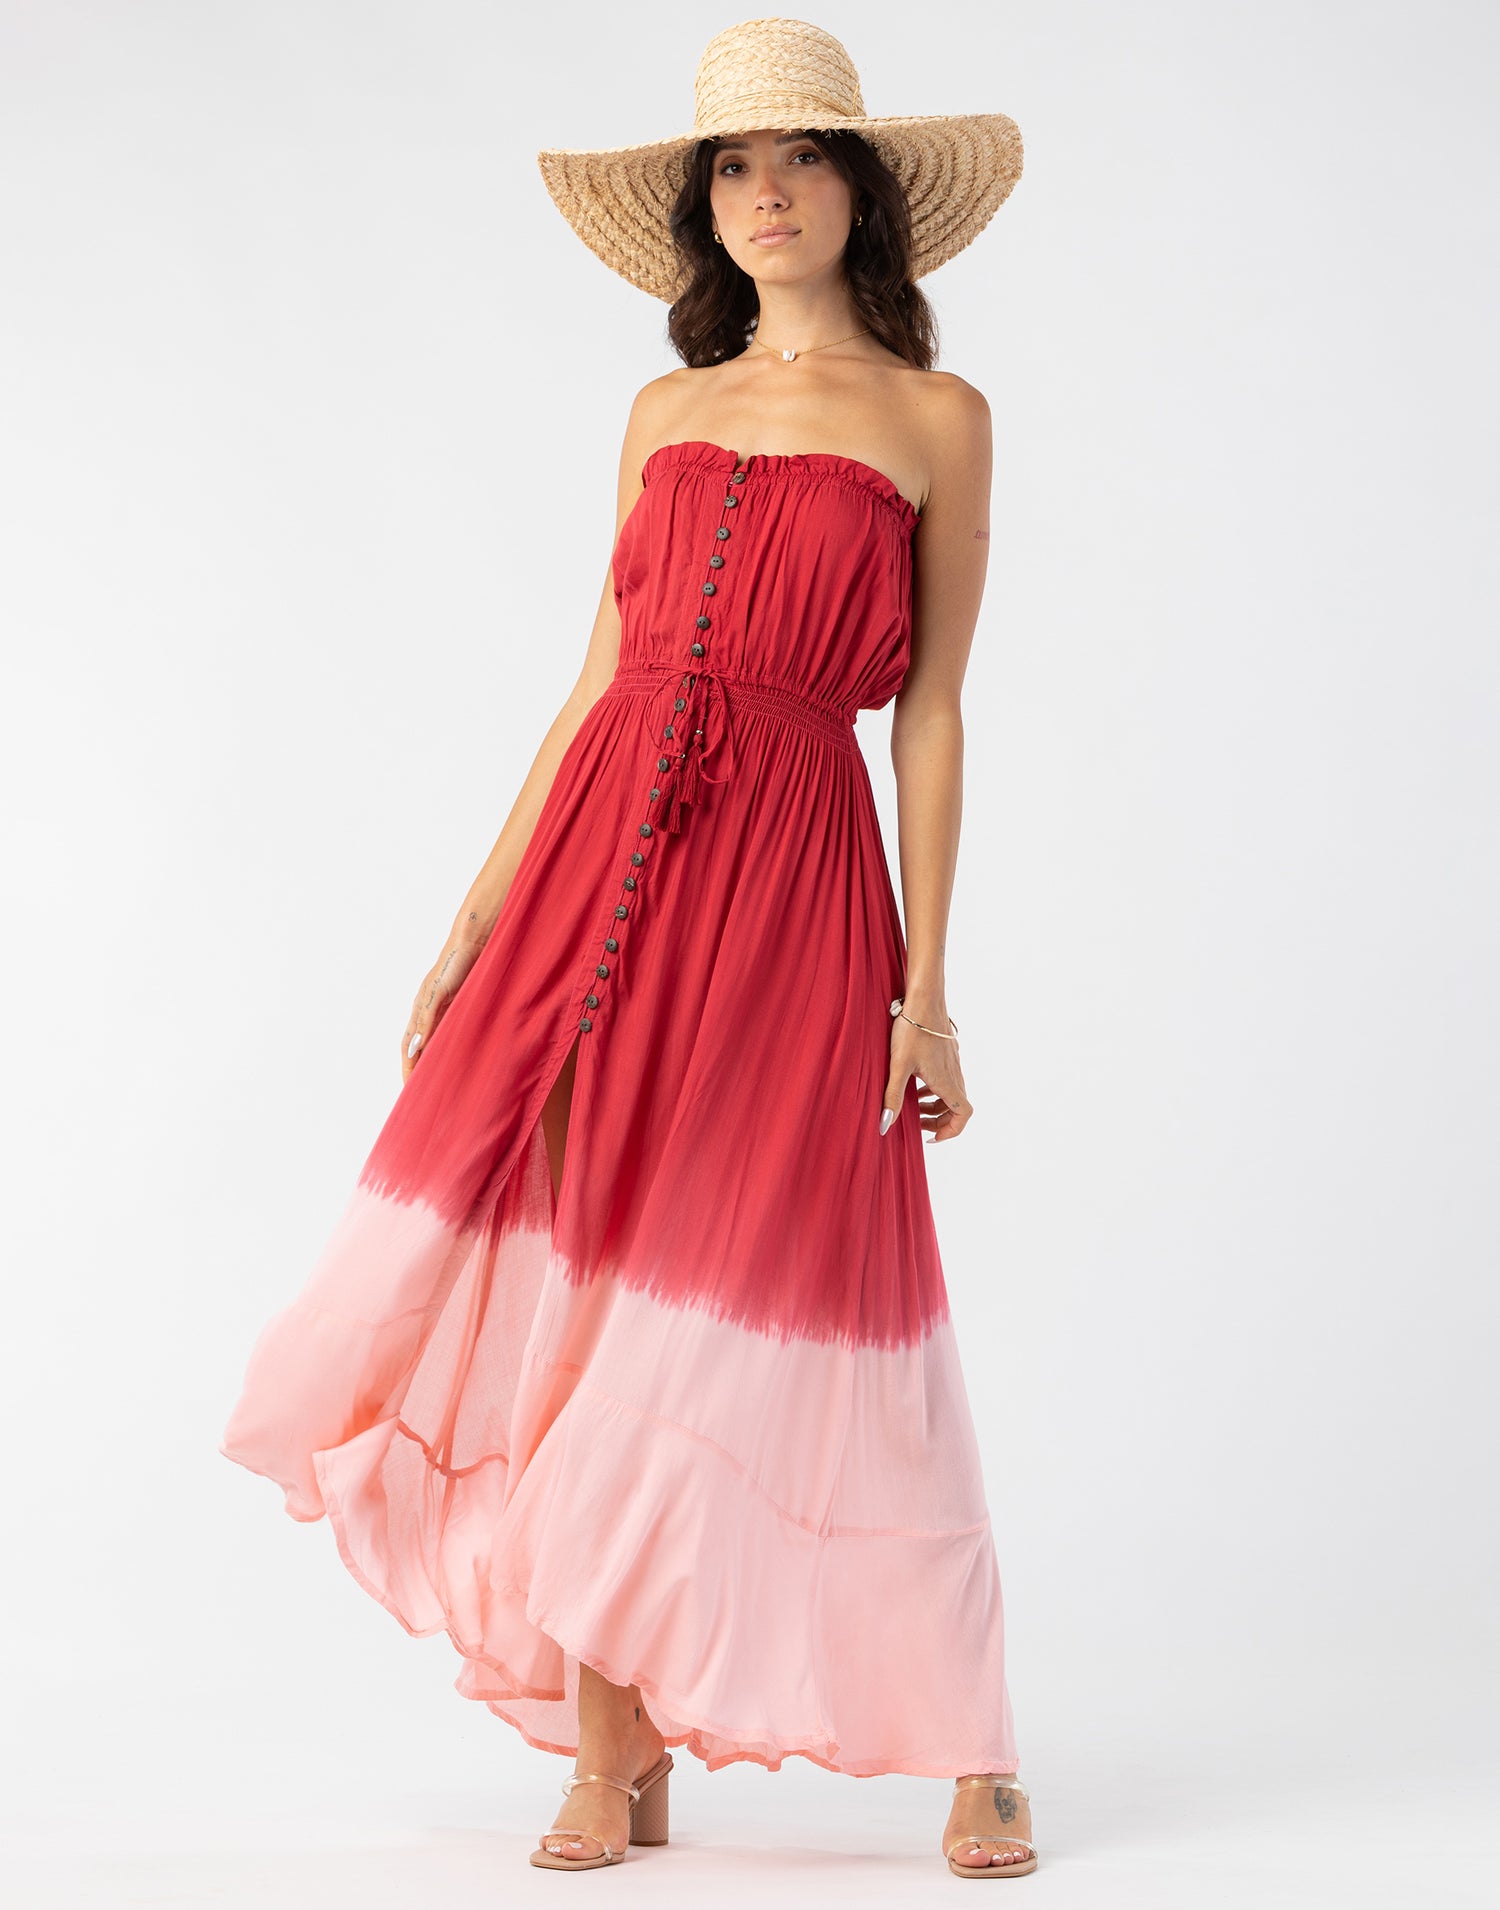 Ryden Maxi Dress by Tiare Hawaii in Ruby Peach Ombre - Front View